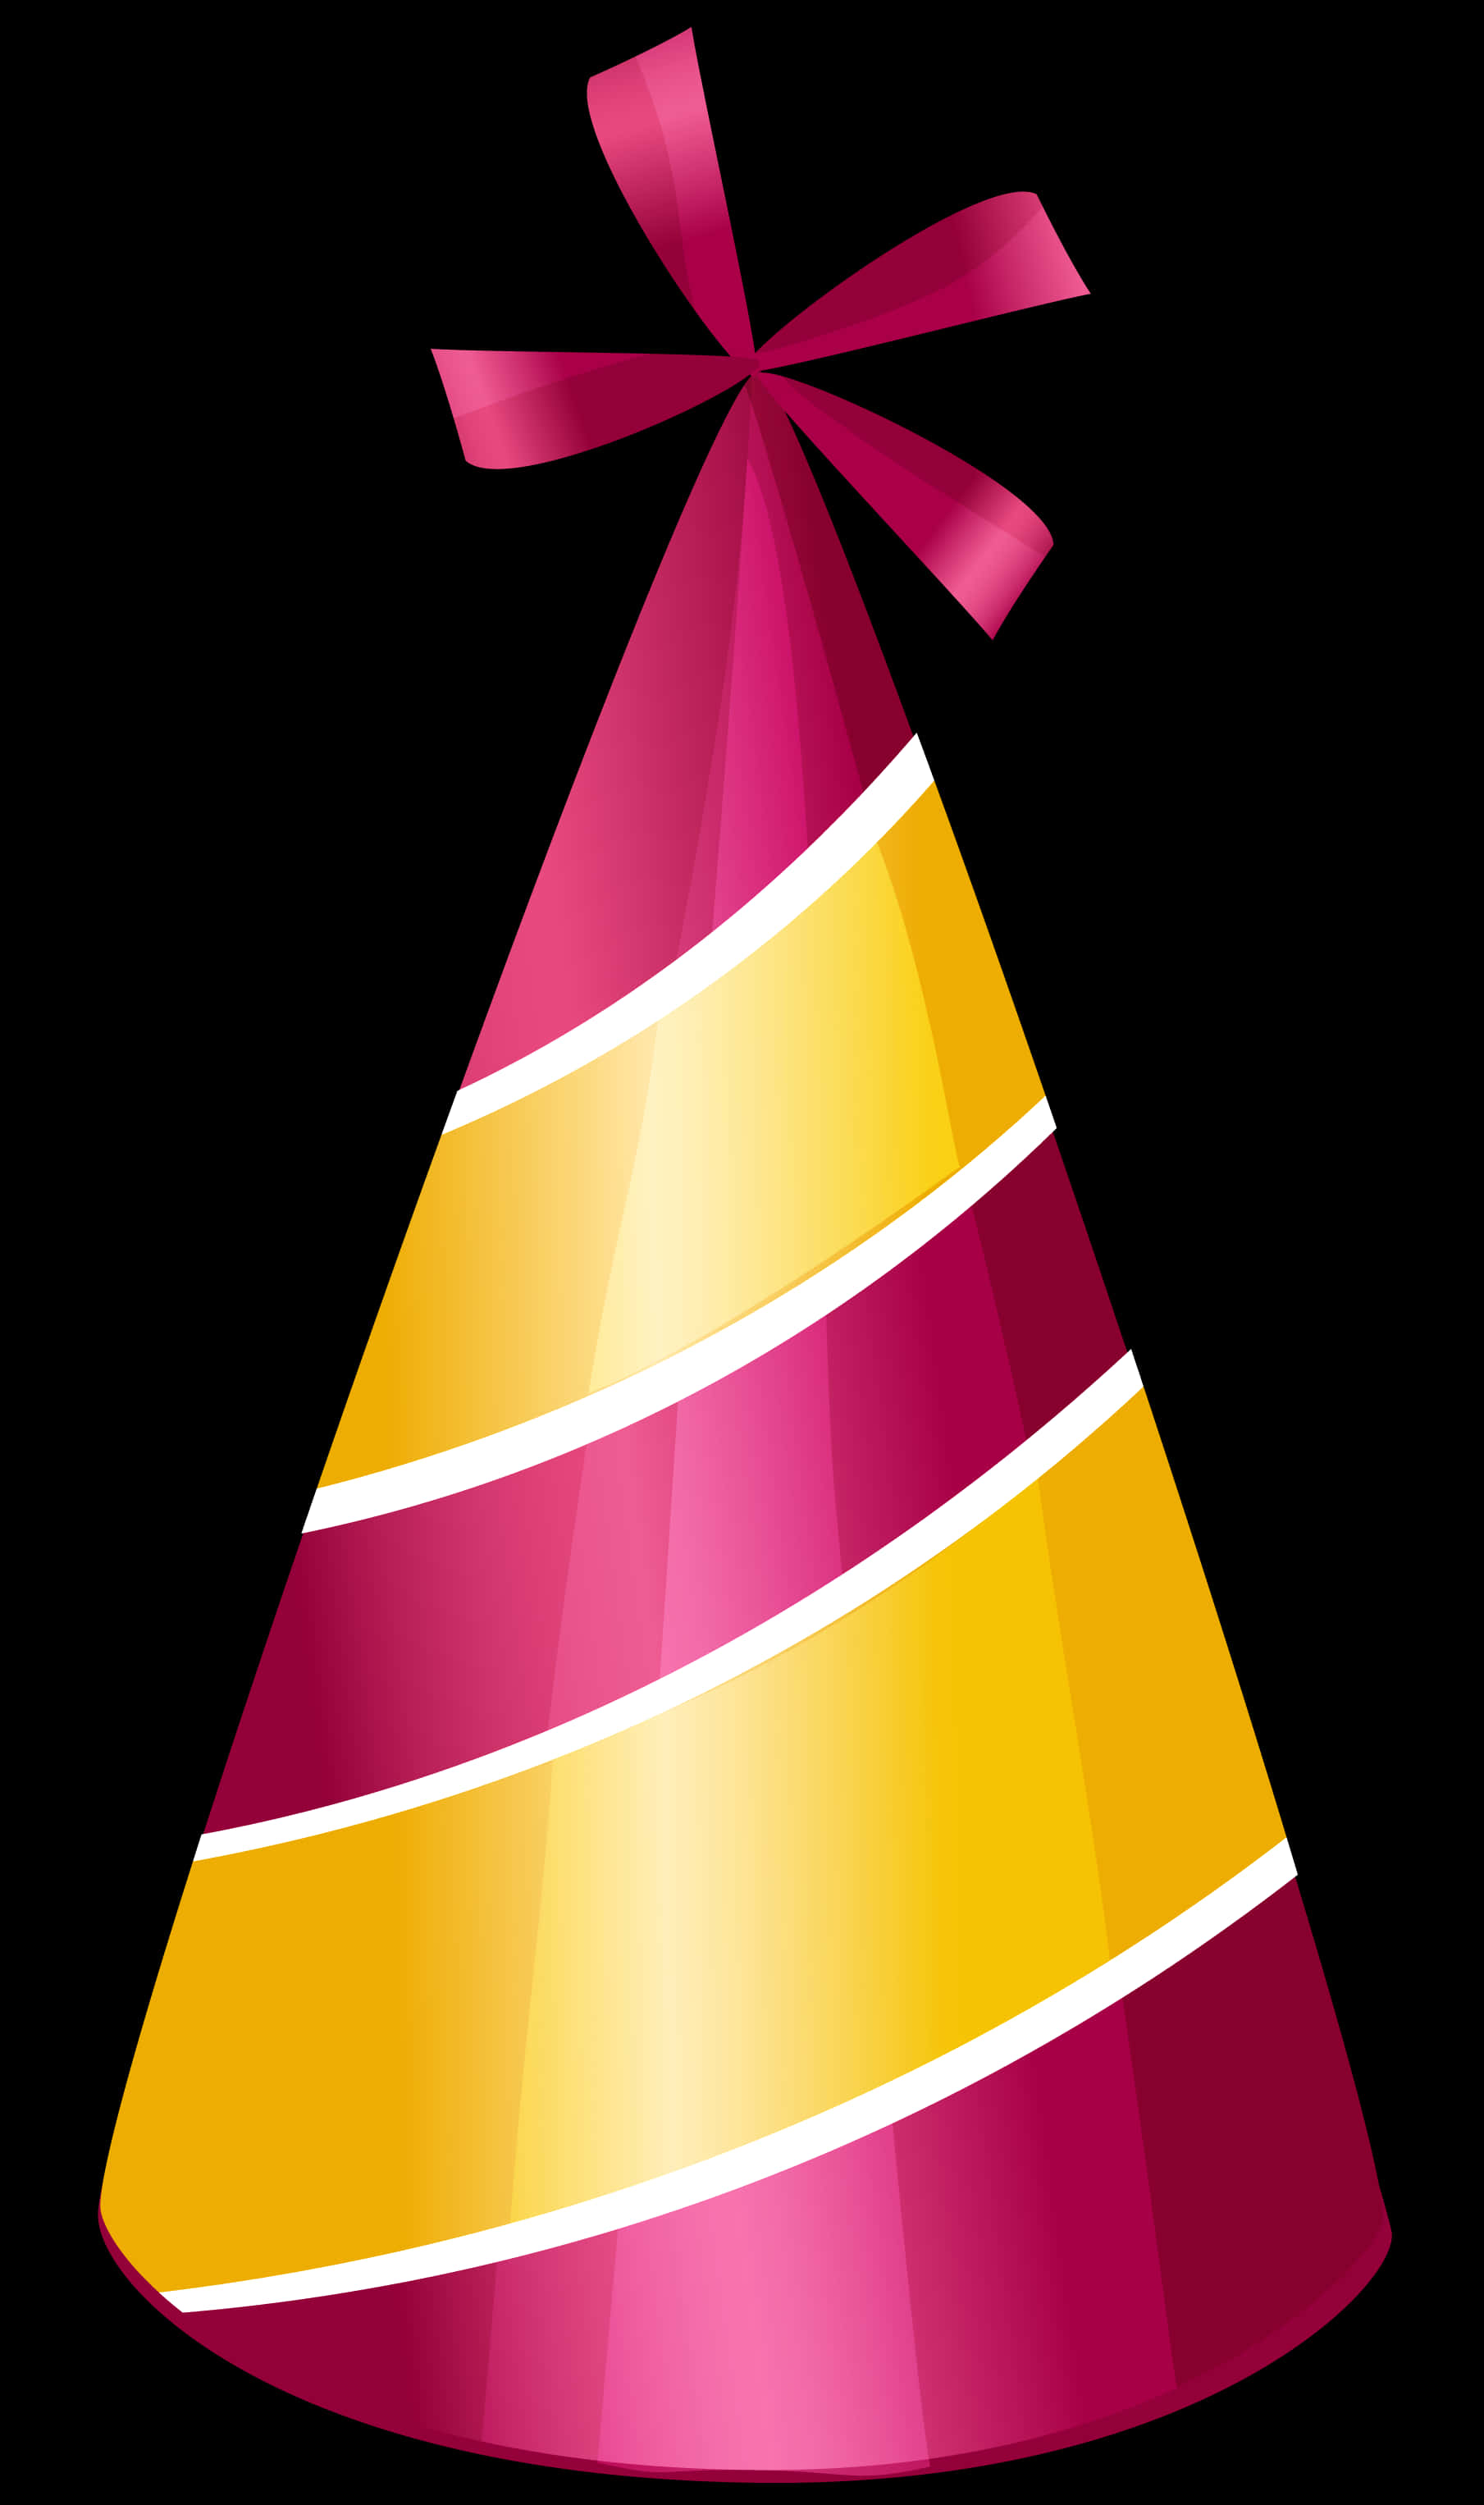 Download Colorful Striped Party Hat | Wallpapers.com